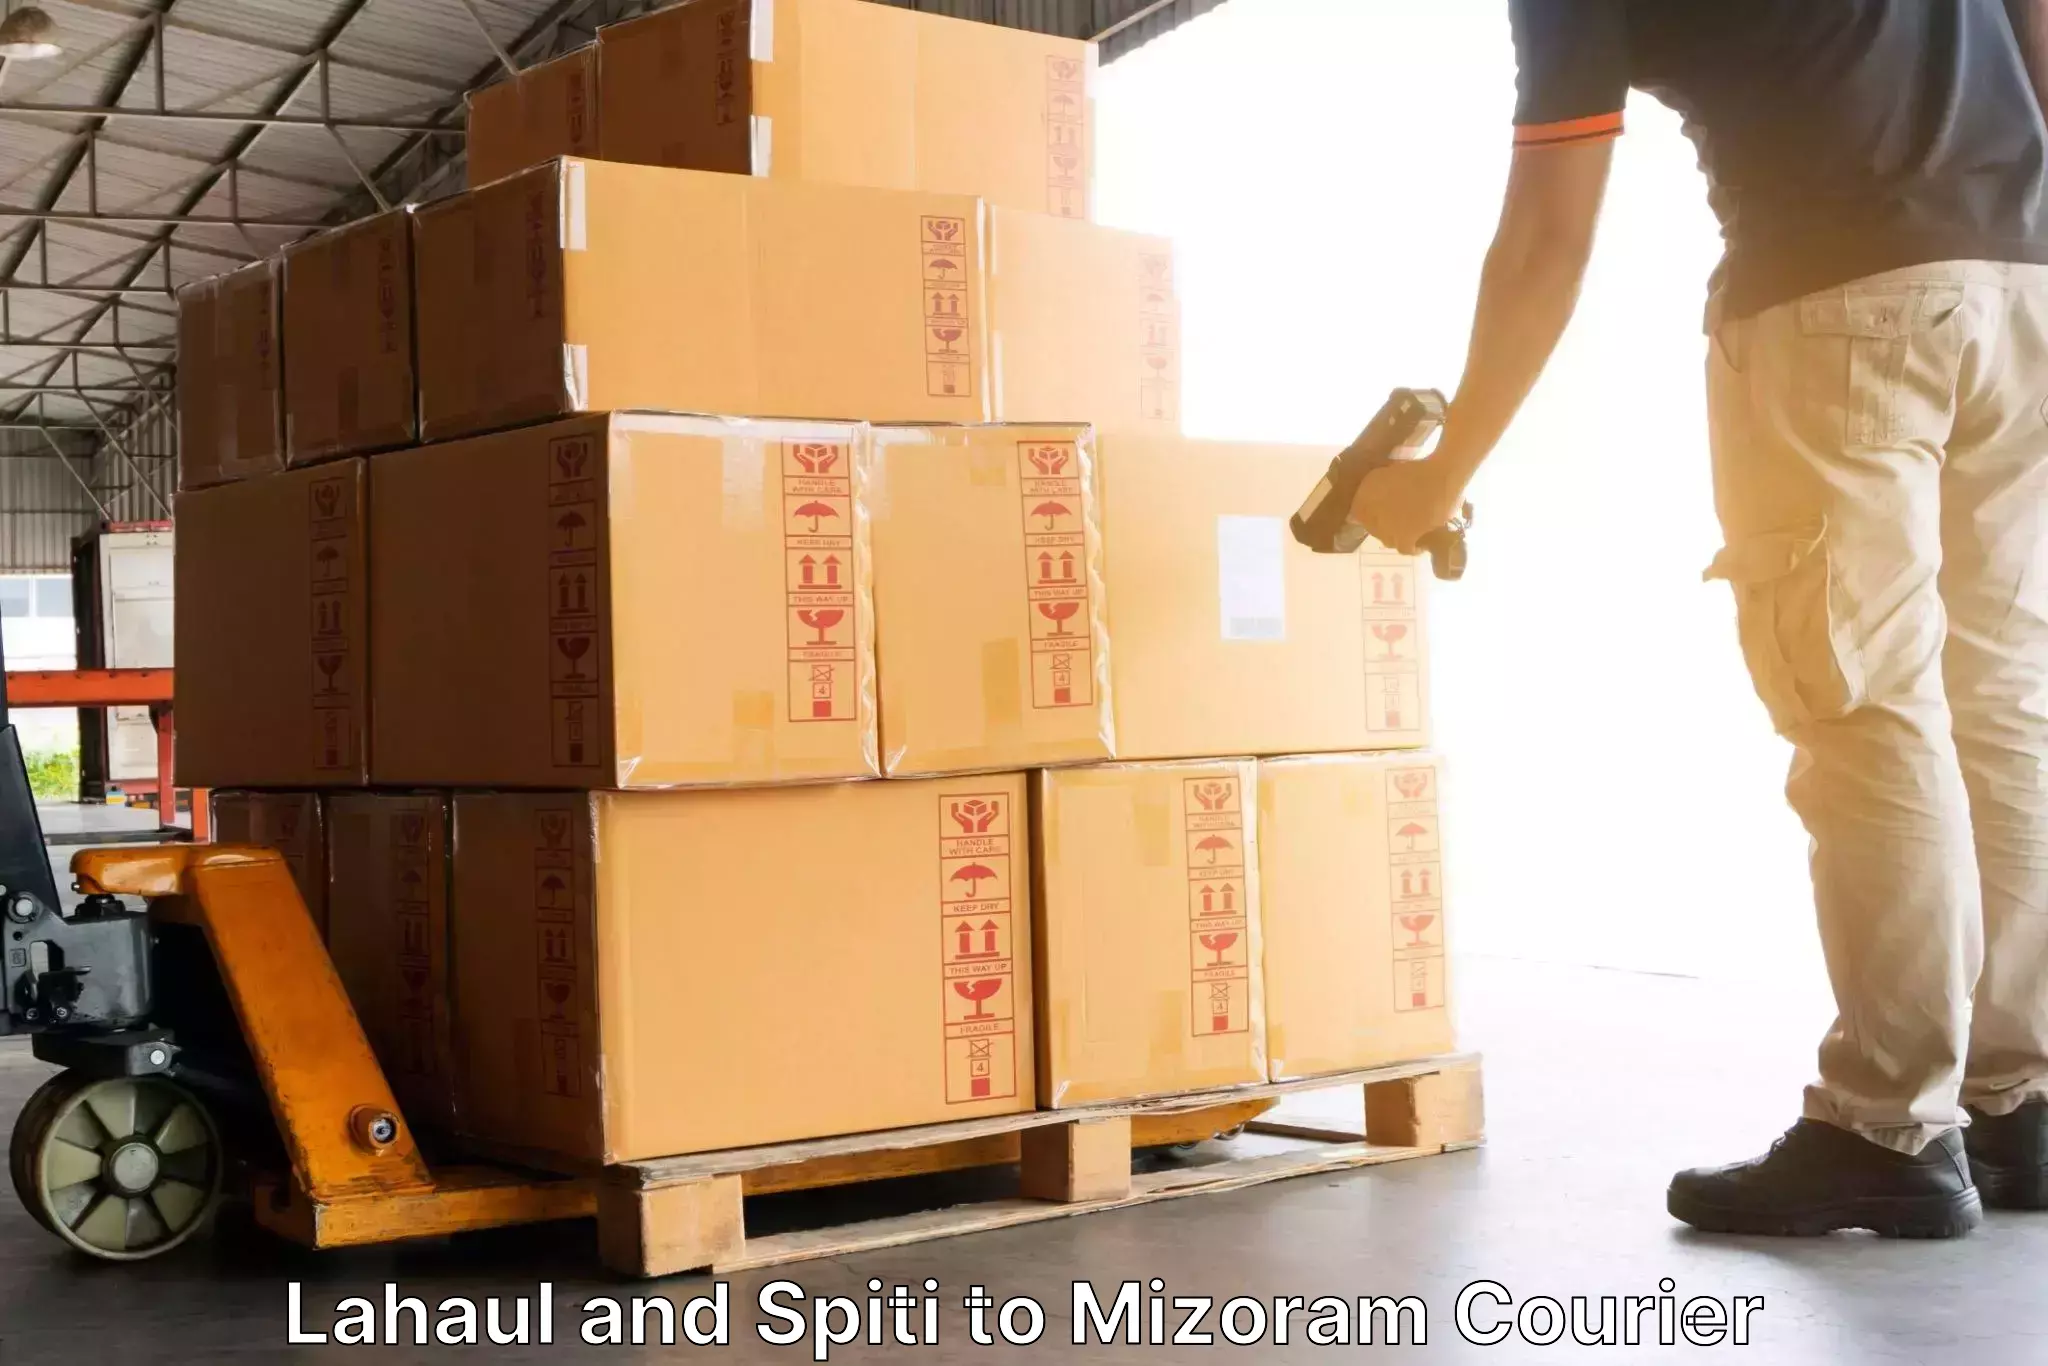 Efficient order fulfillment Lahaul and Spiti to Mizoram